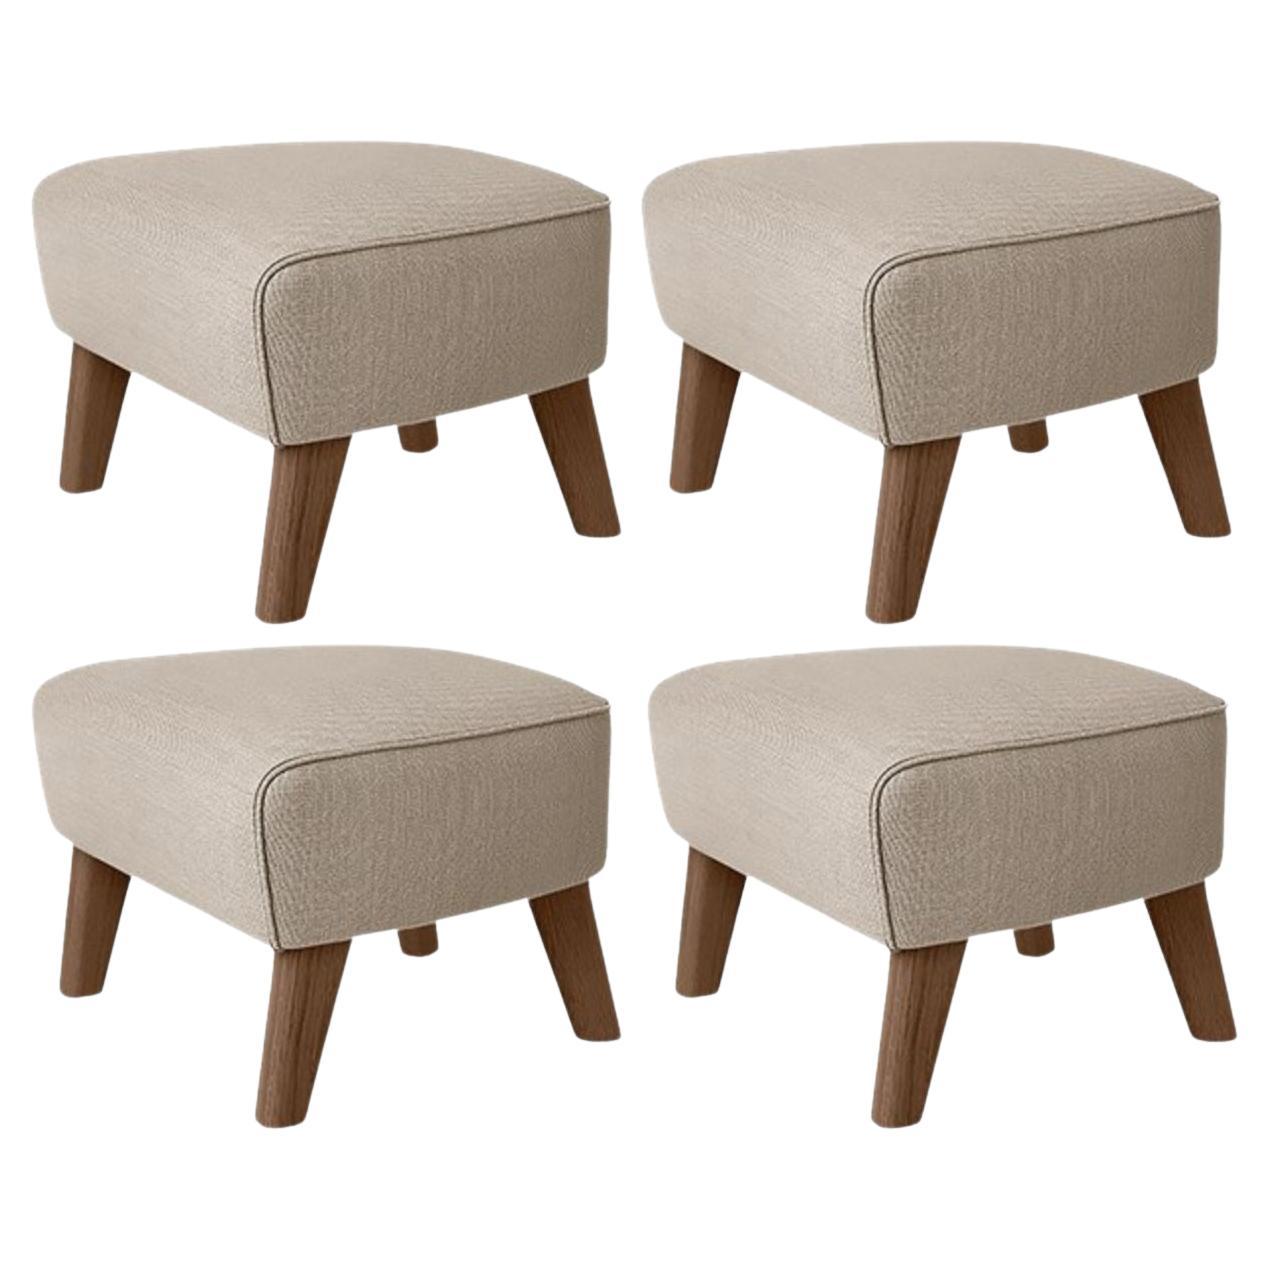 Set of 4 Beige and Smoked Oak Sahco Zero Footstool by Lassen For Sale